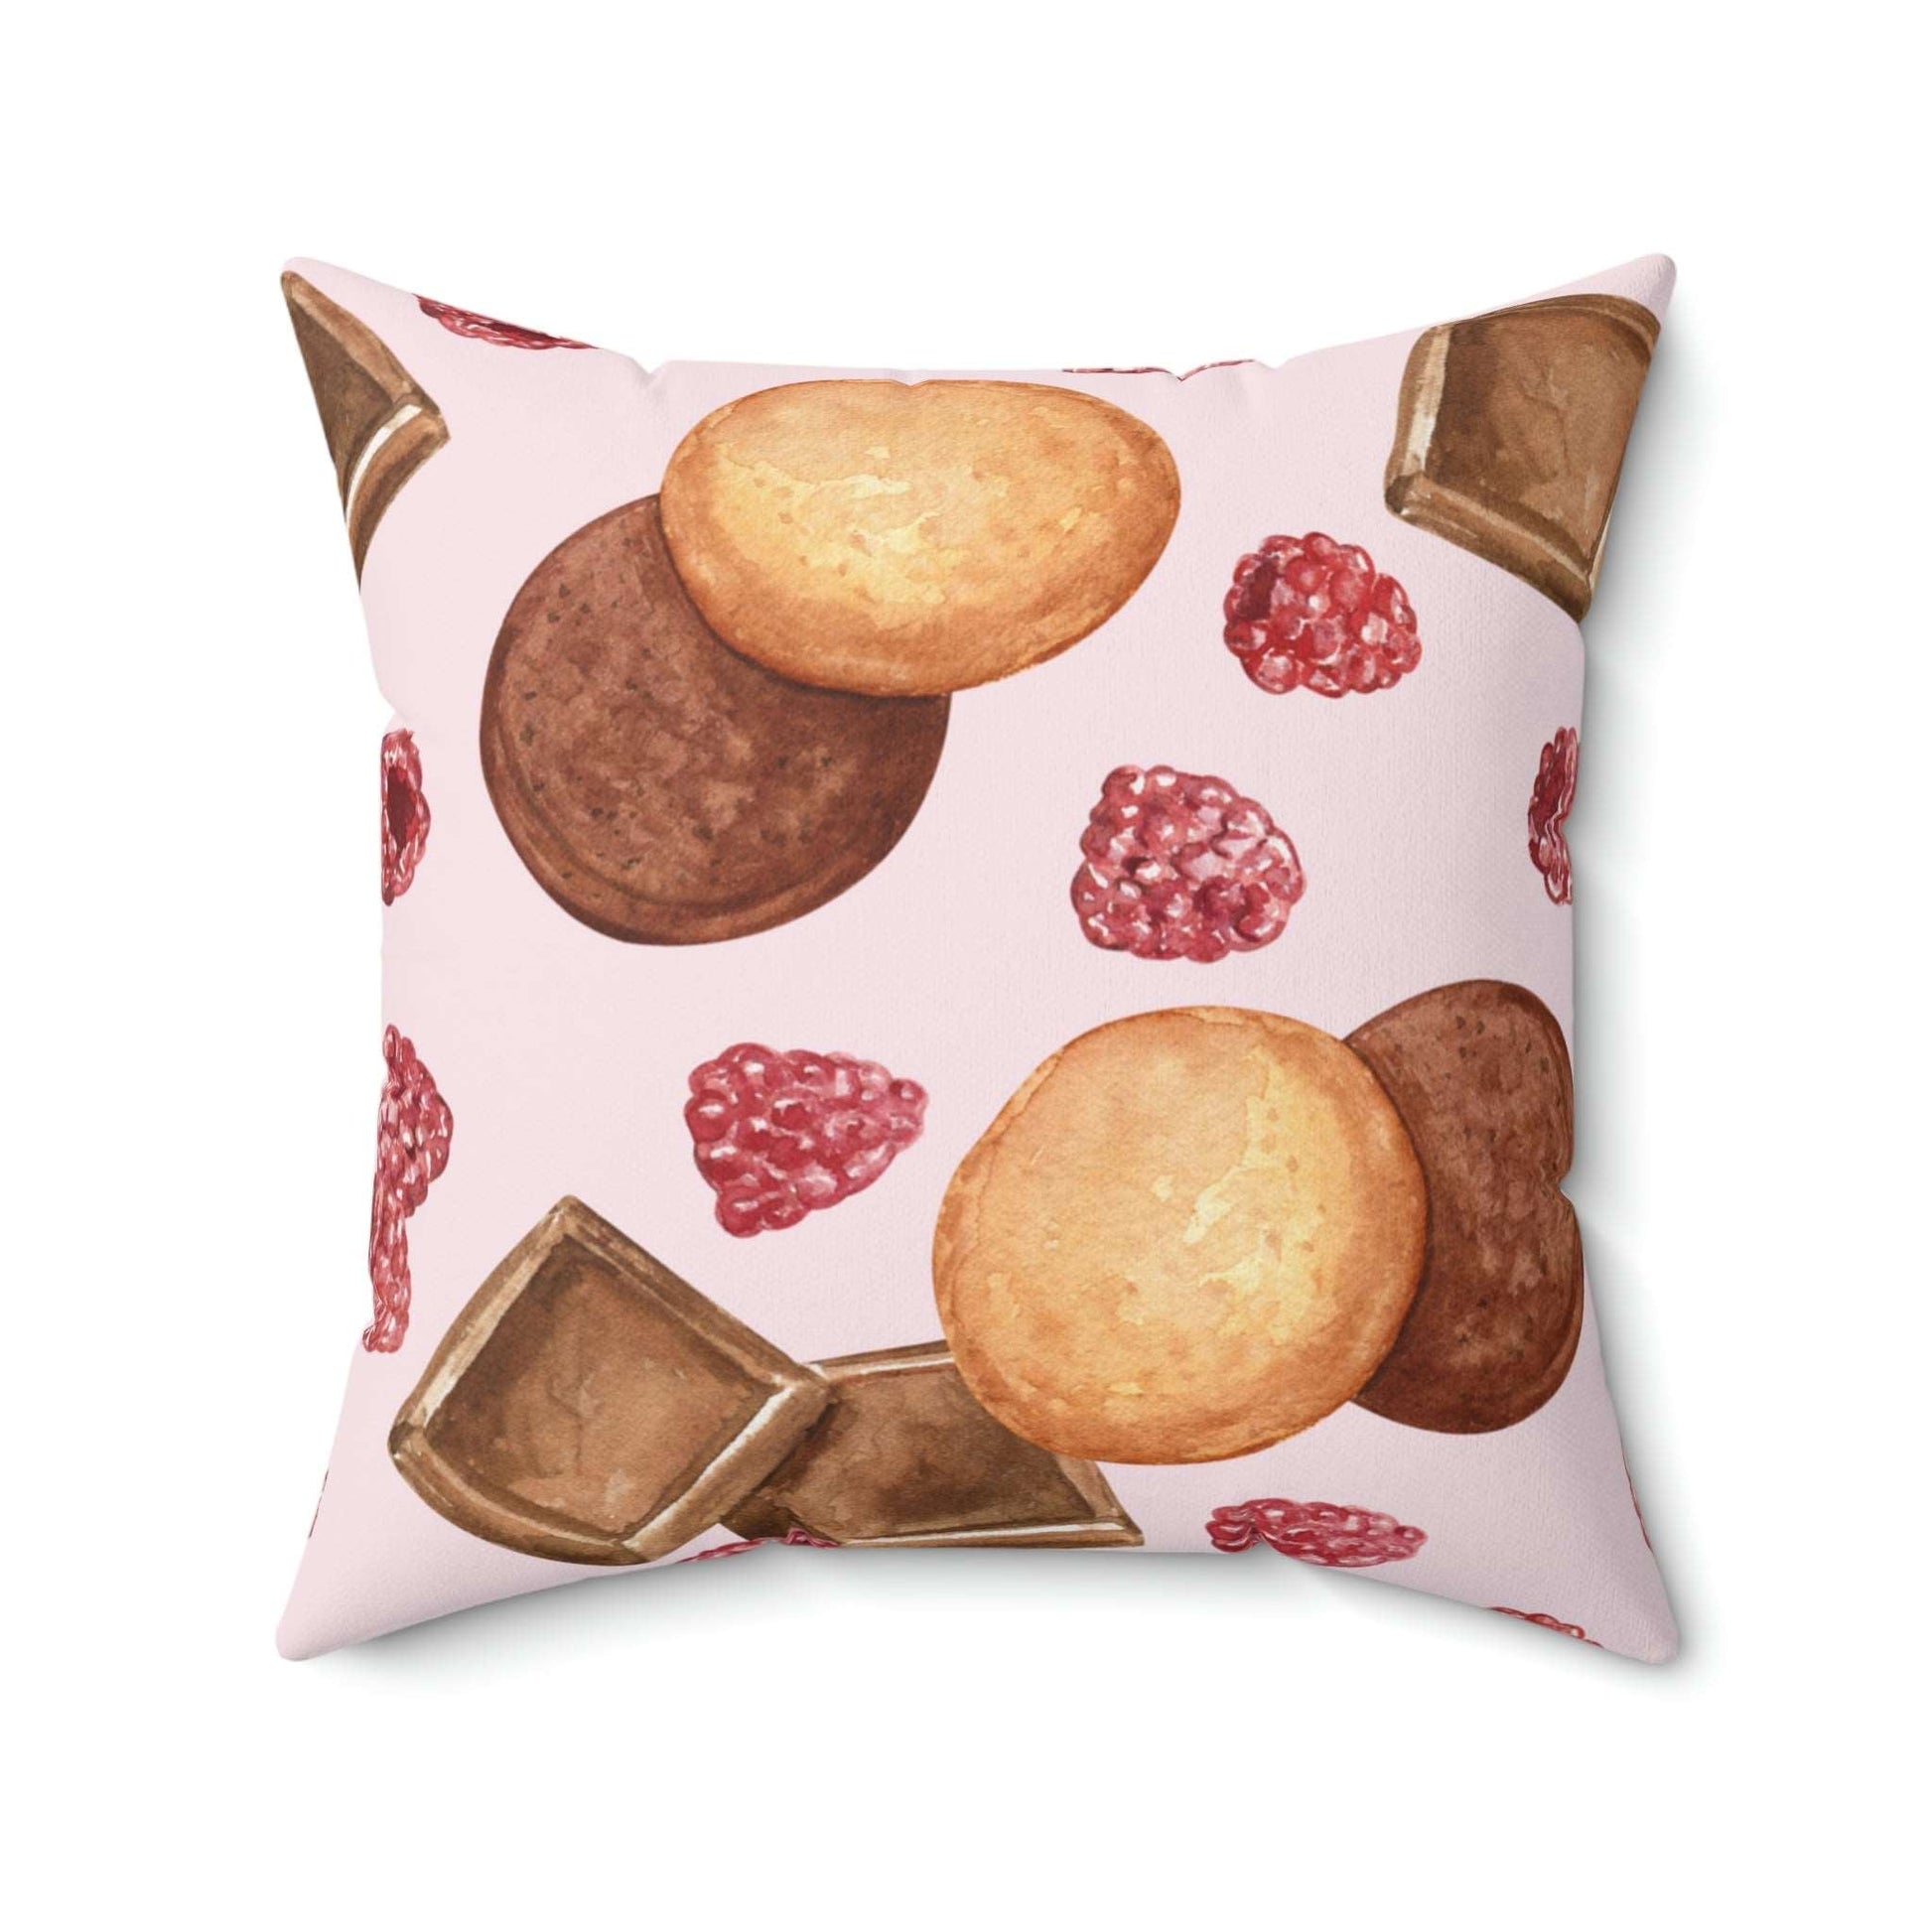 Chocolate and Raspberries Square Pillow Home Decor Pink Sweetheart